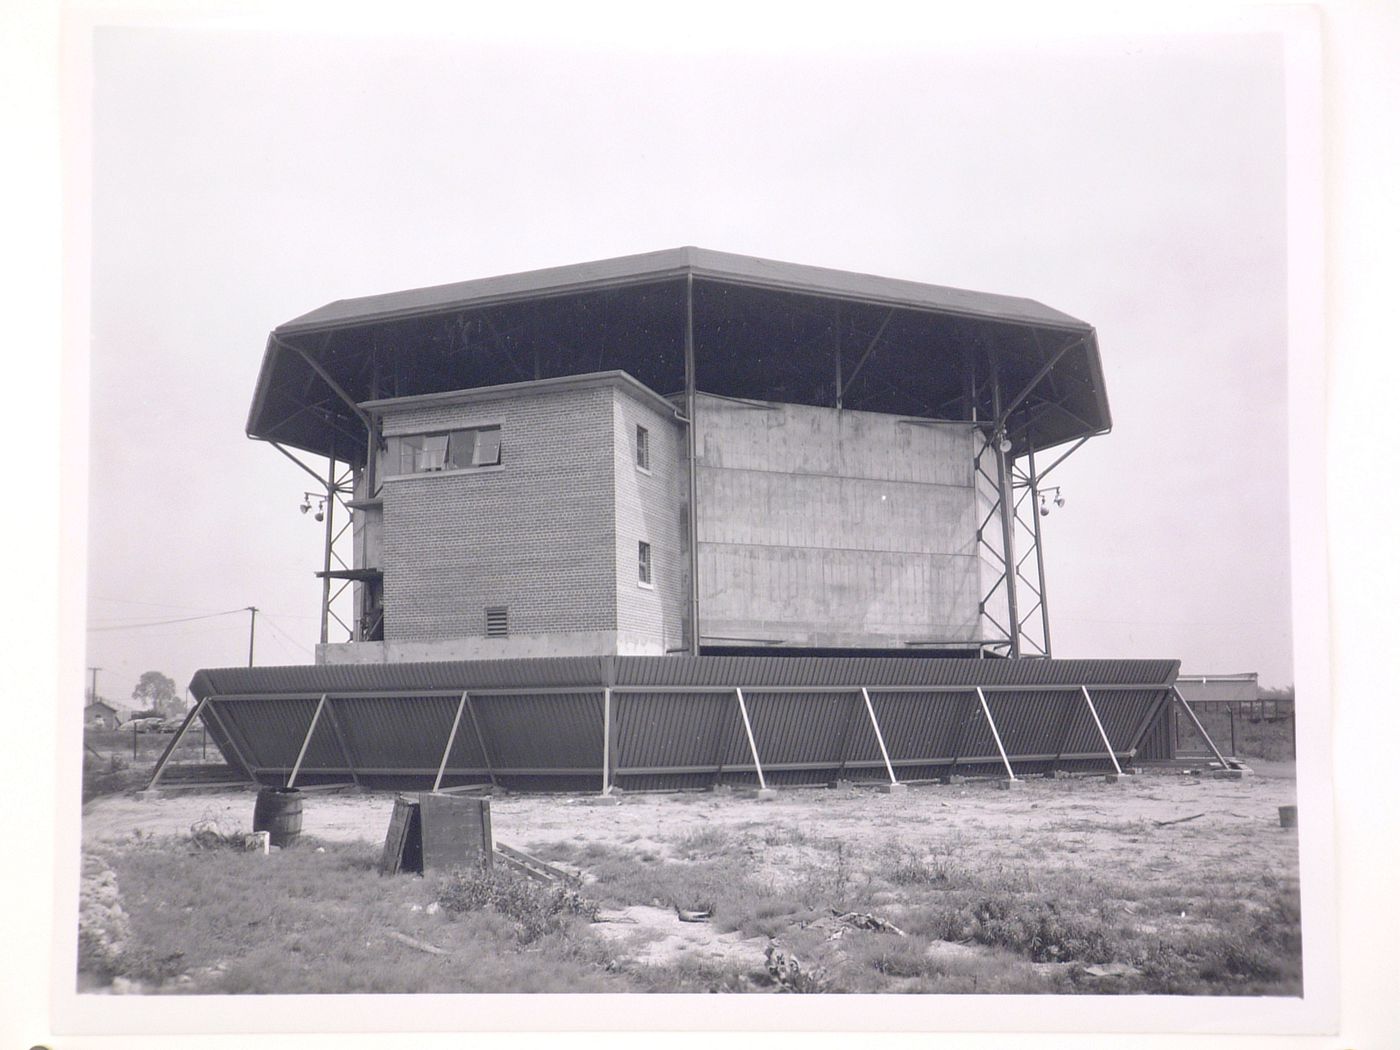 View of the Helicopter Rotor Test Building, Nash-Kelvinator Corporation, Detroit, Michigan